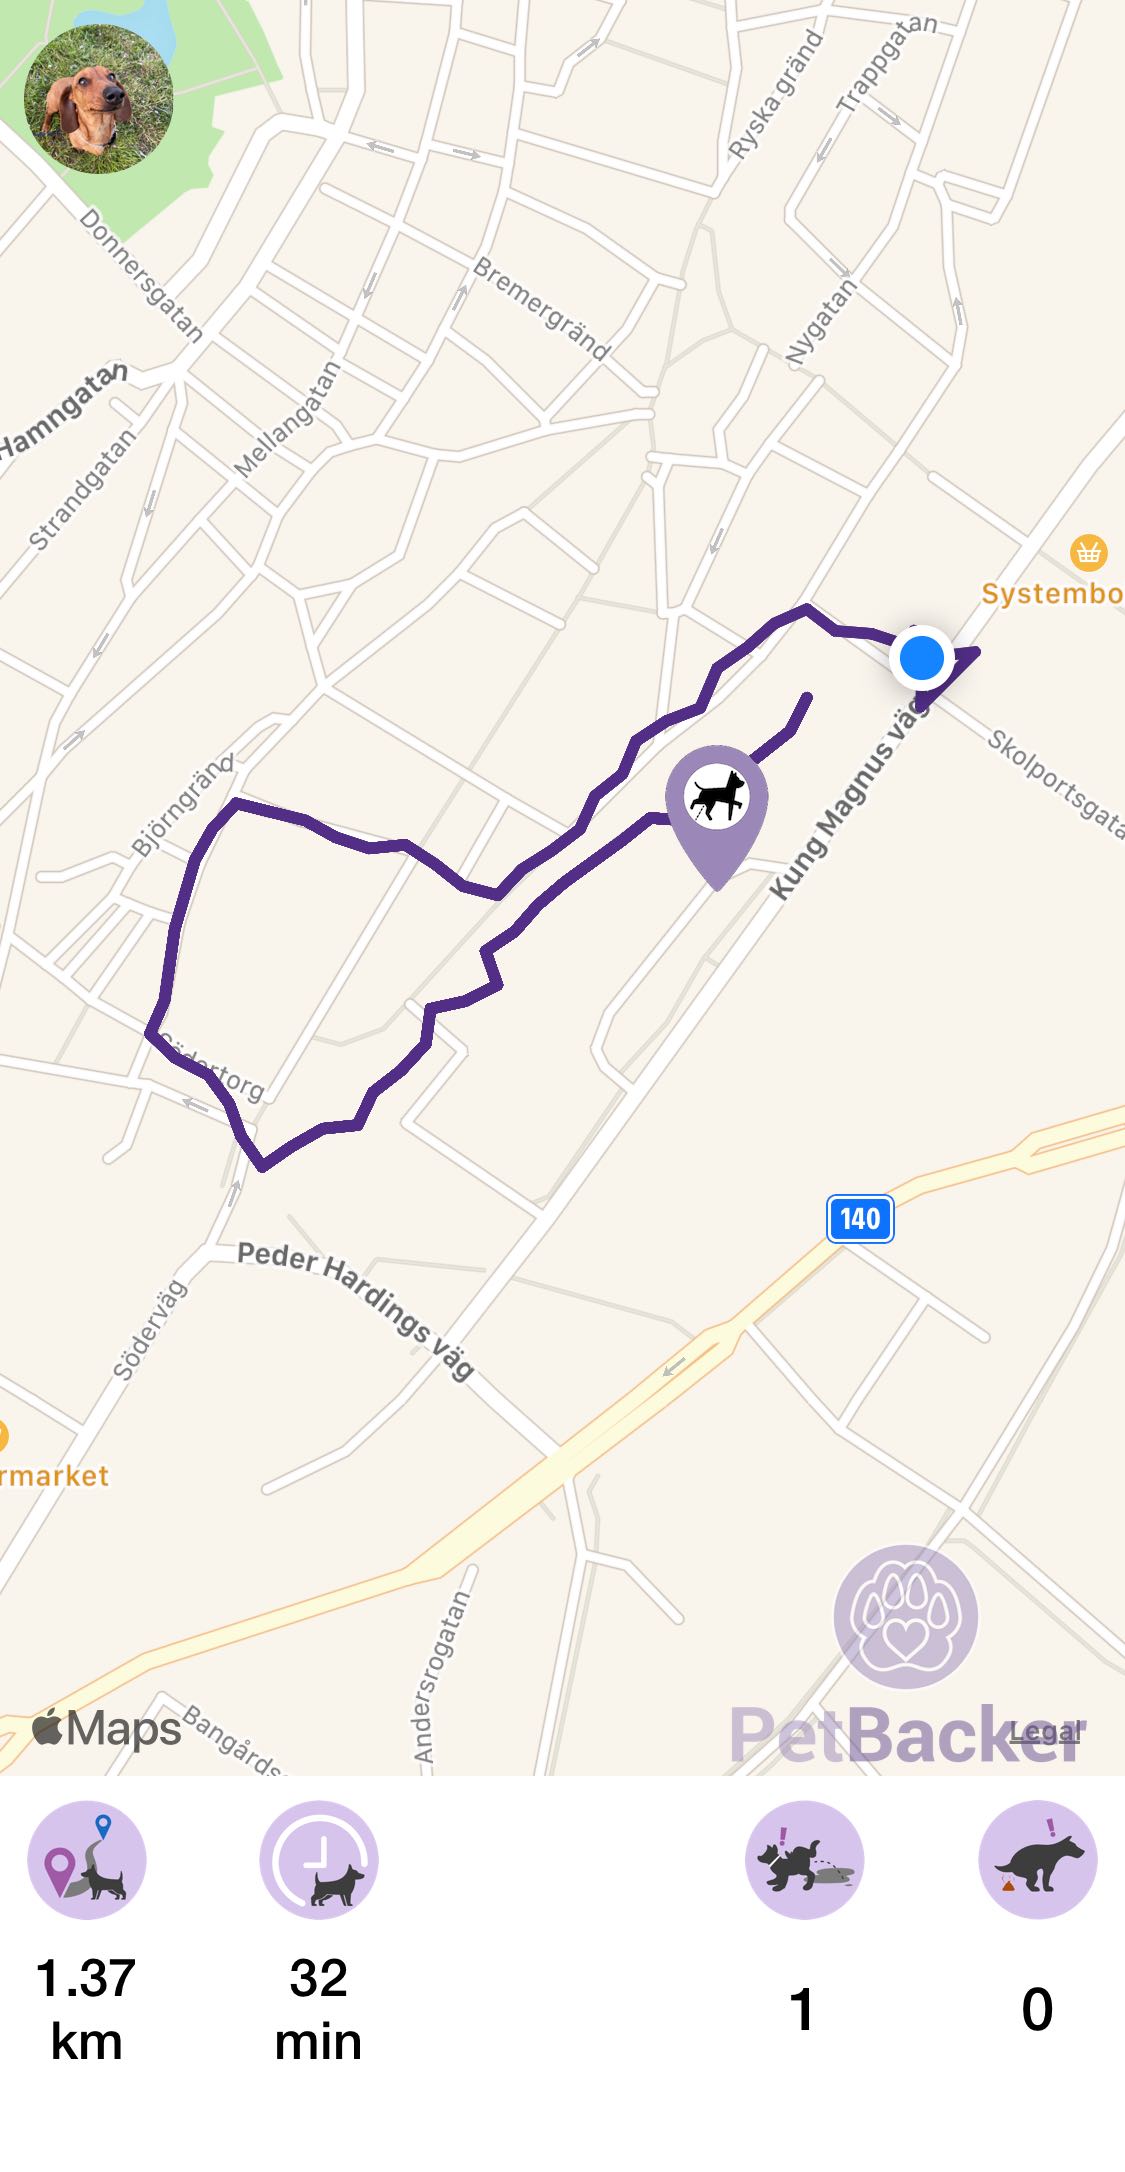 Just completed pet walking of 1.37 km